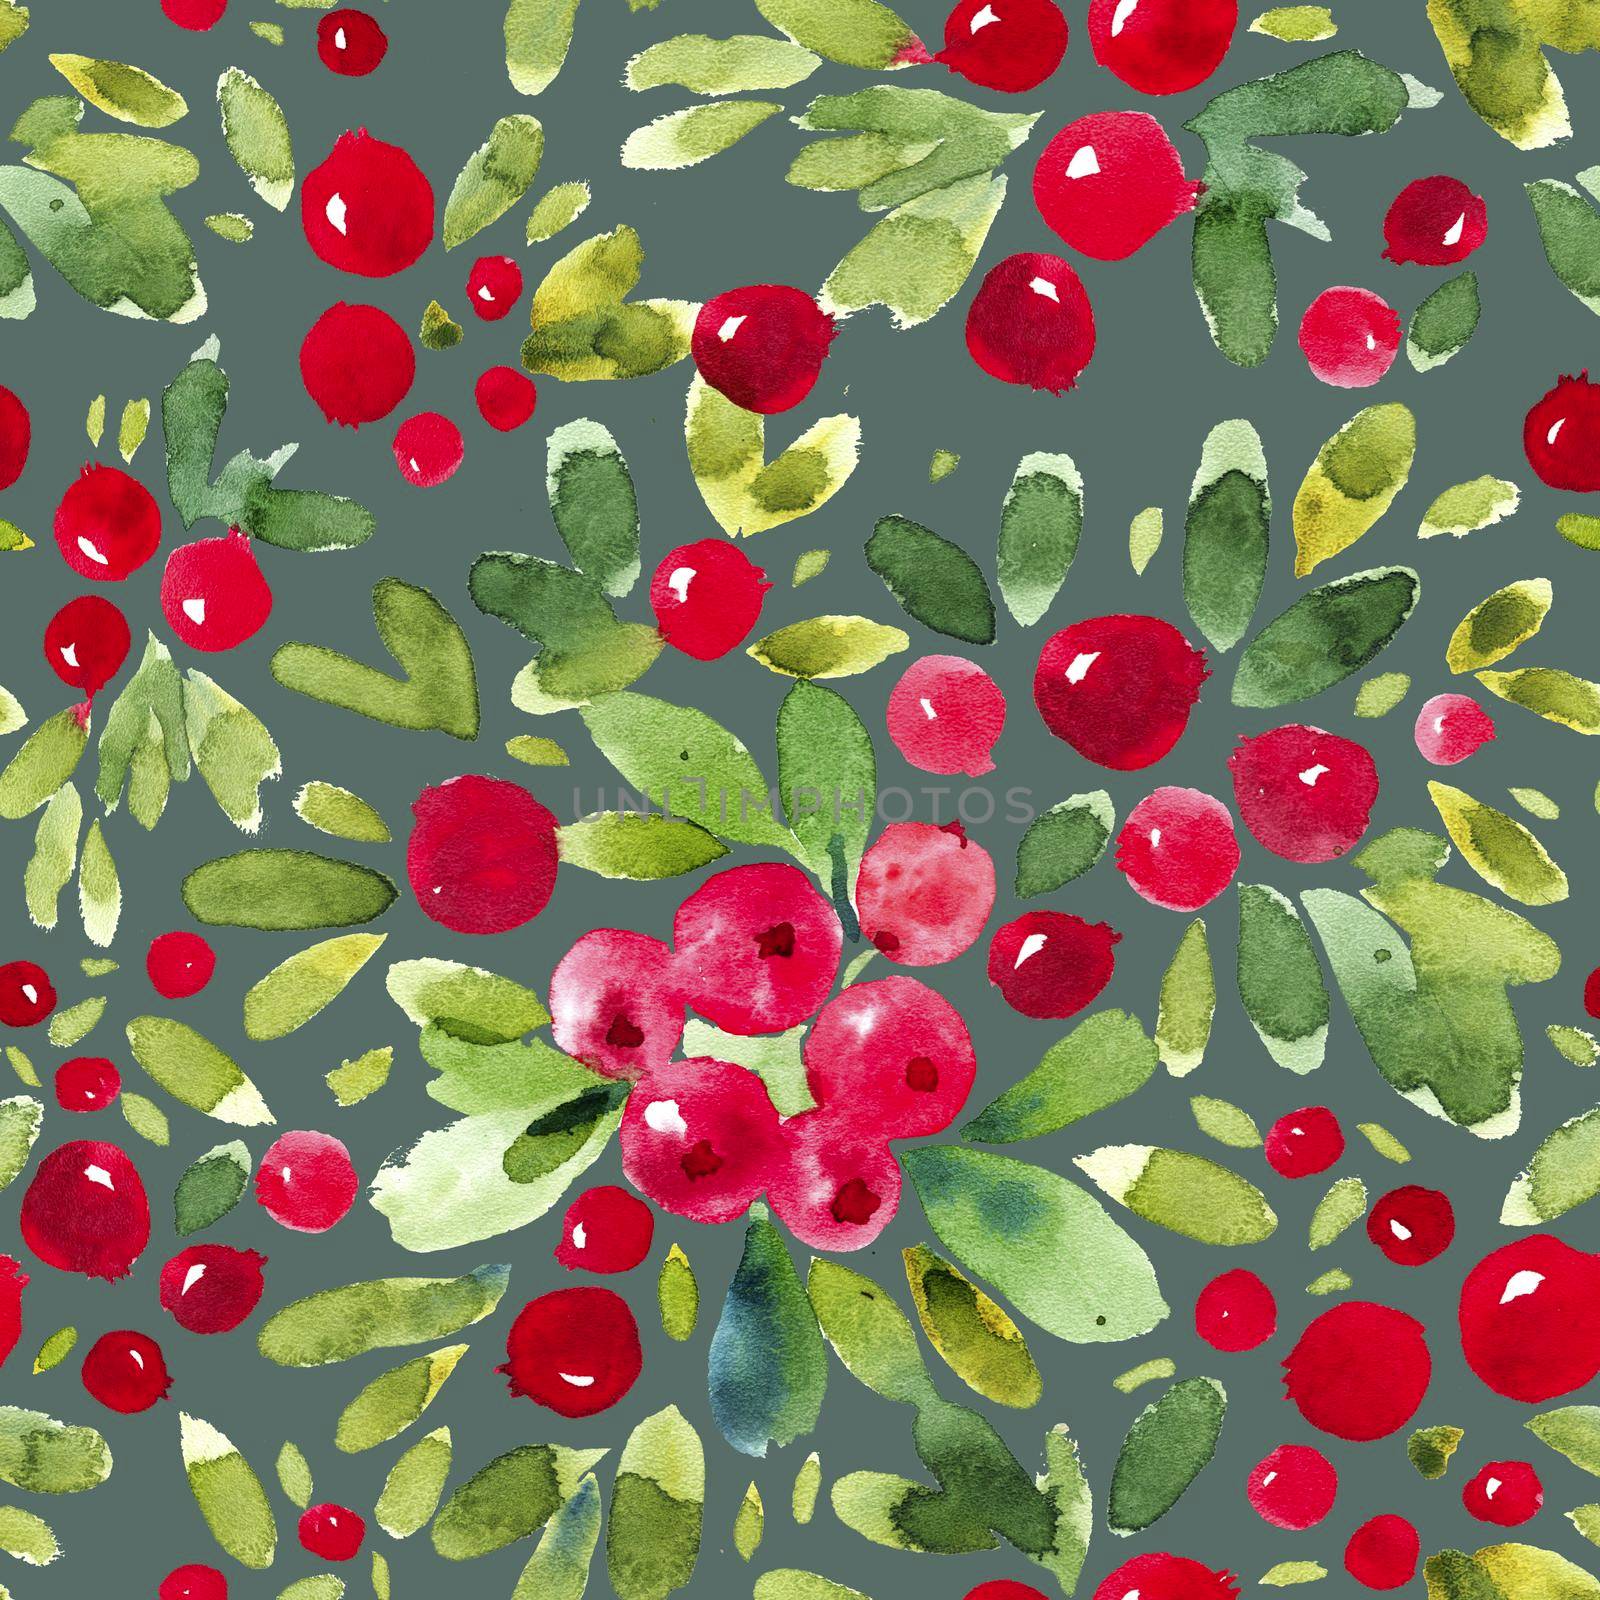 Nature seamless pattern of red berries, traces watercolor